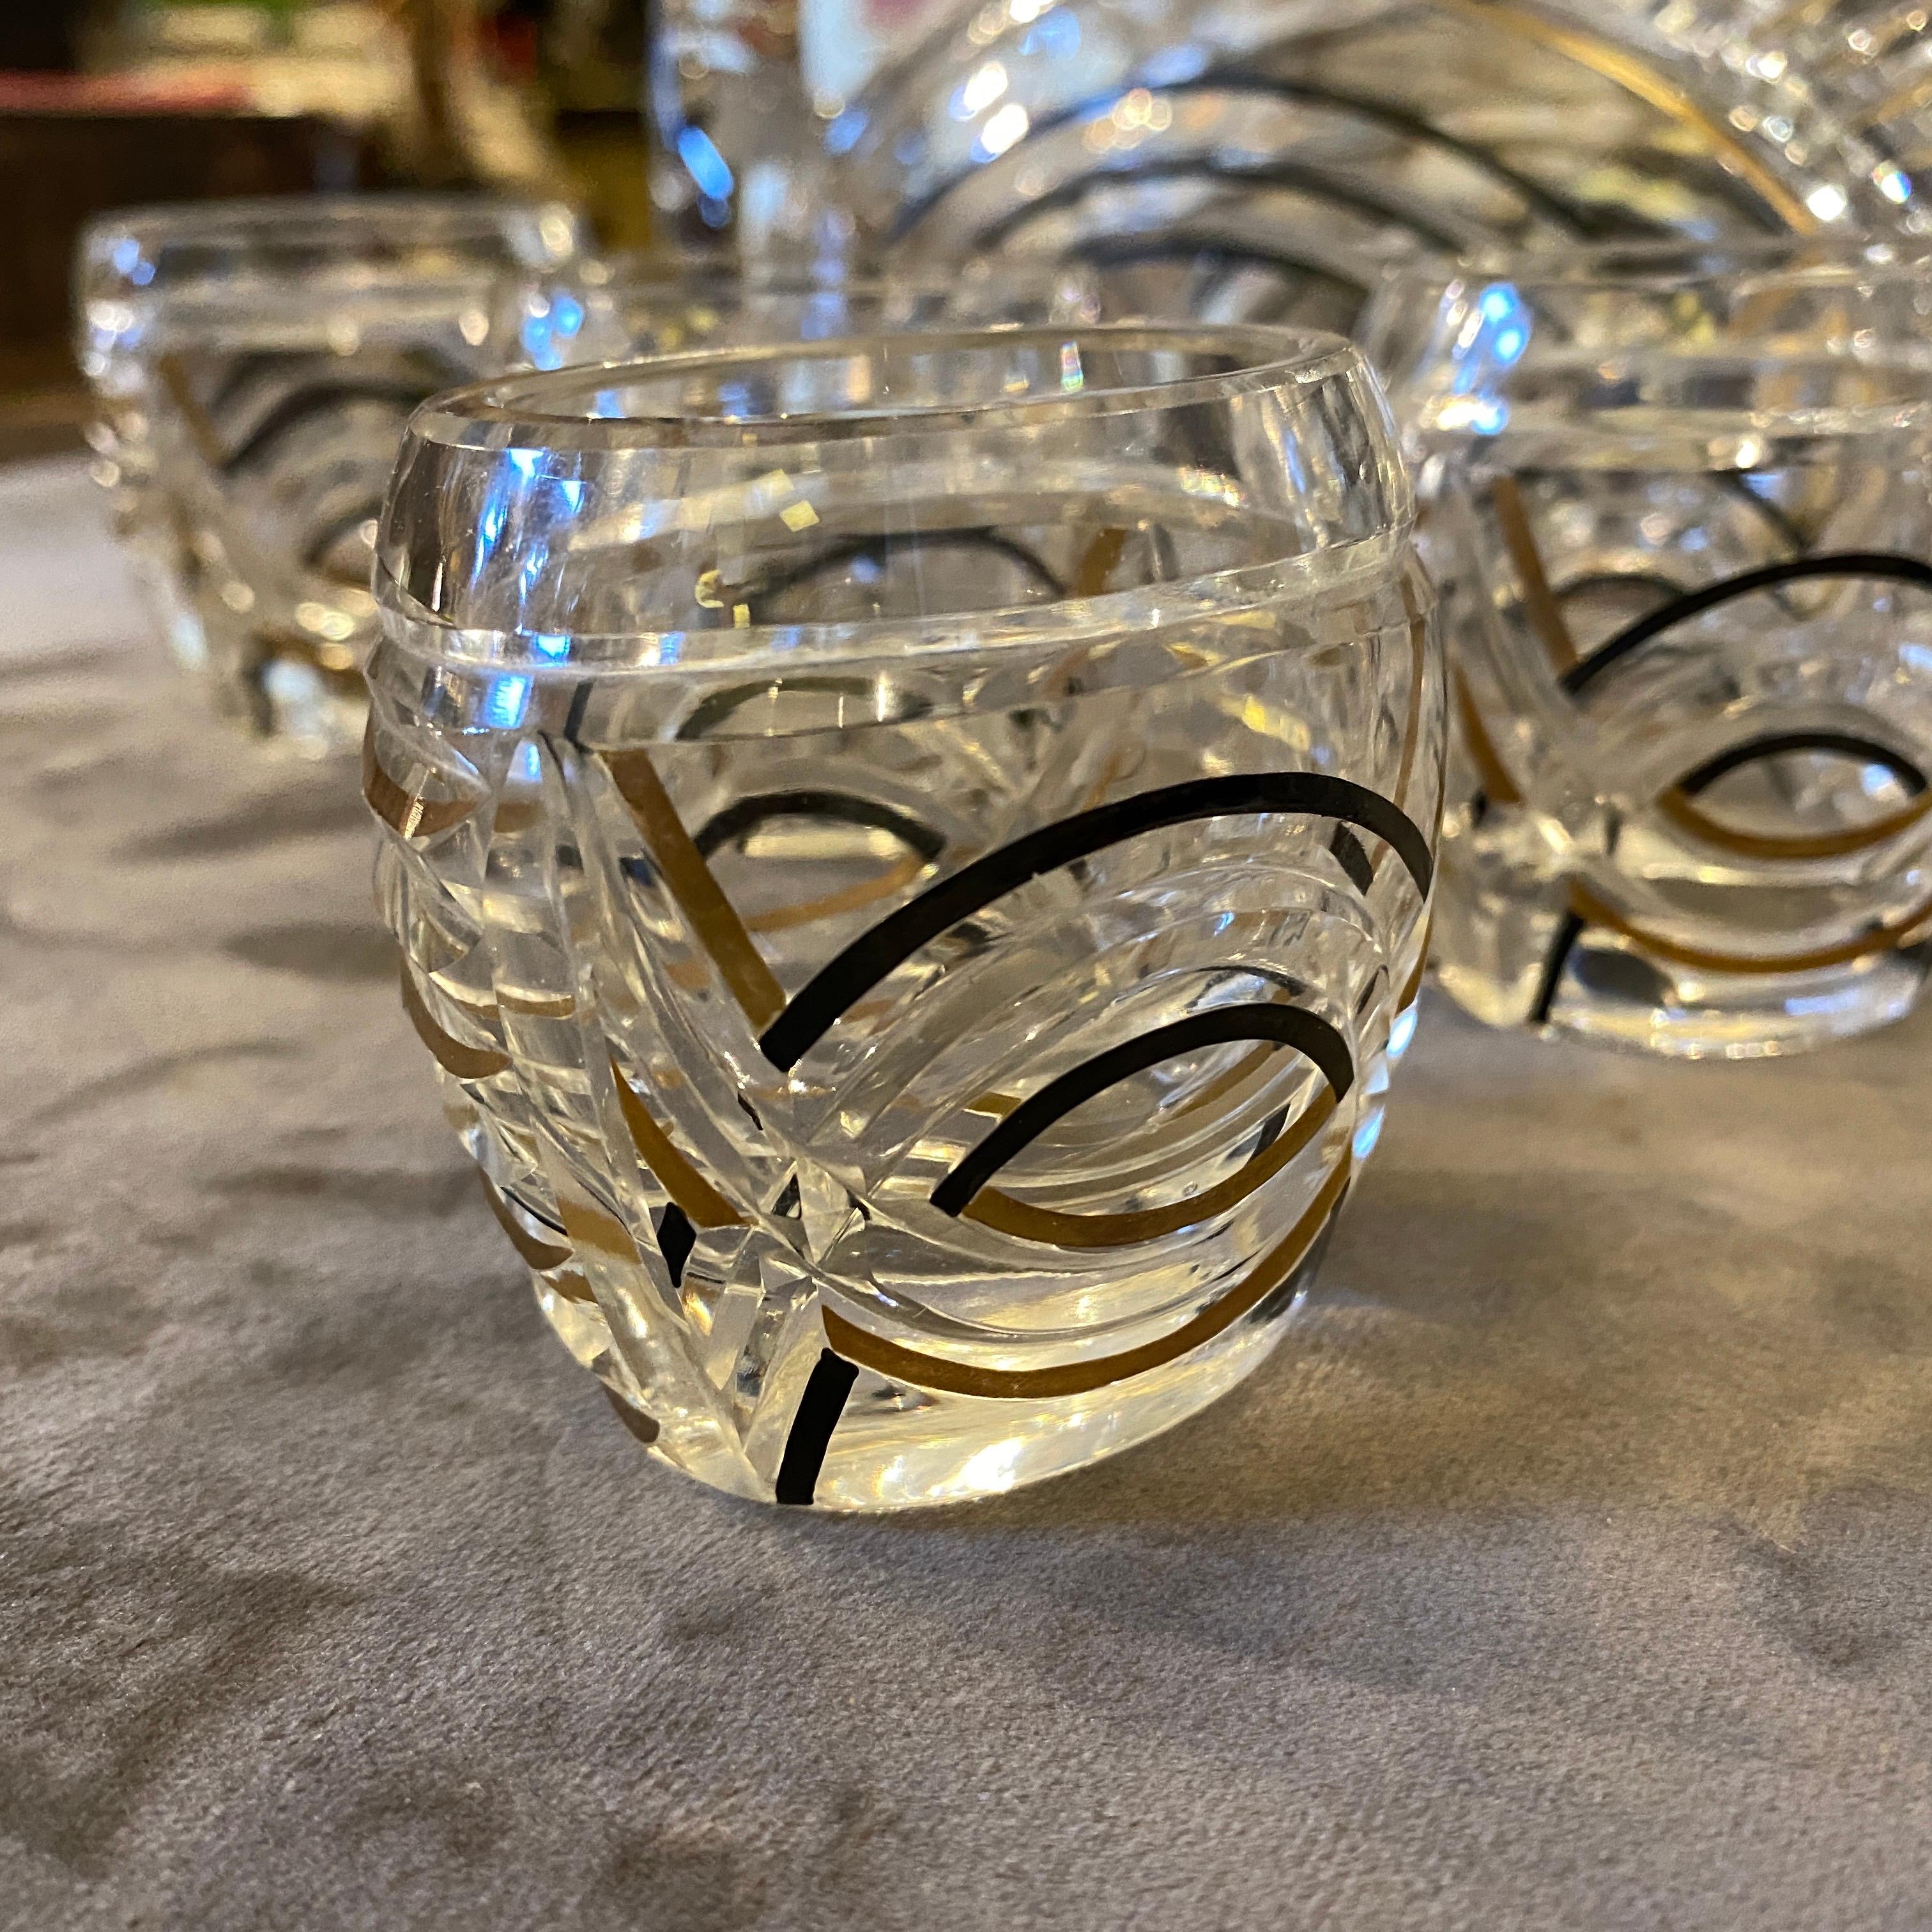 Stylish Art Deco liquor set made in Italy in the 1930s, engraved crystal with black and gold decor is in perfect conditions. Oval bottle dimensions declared. Glass height is about 3 inches.